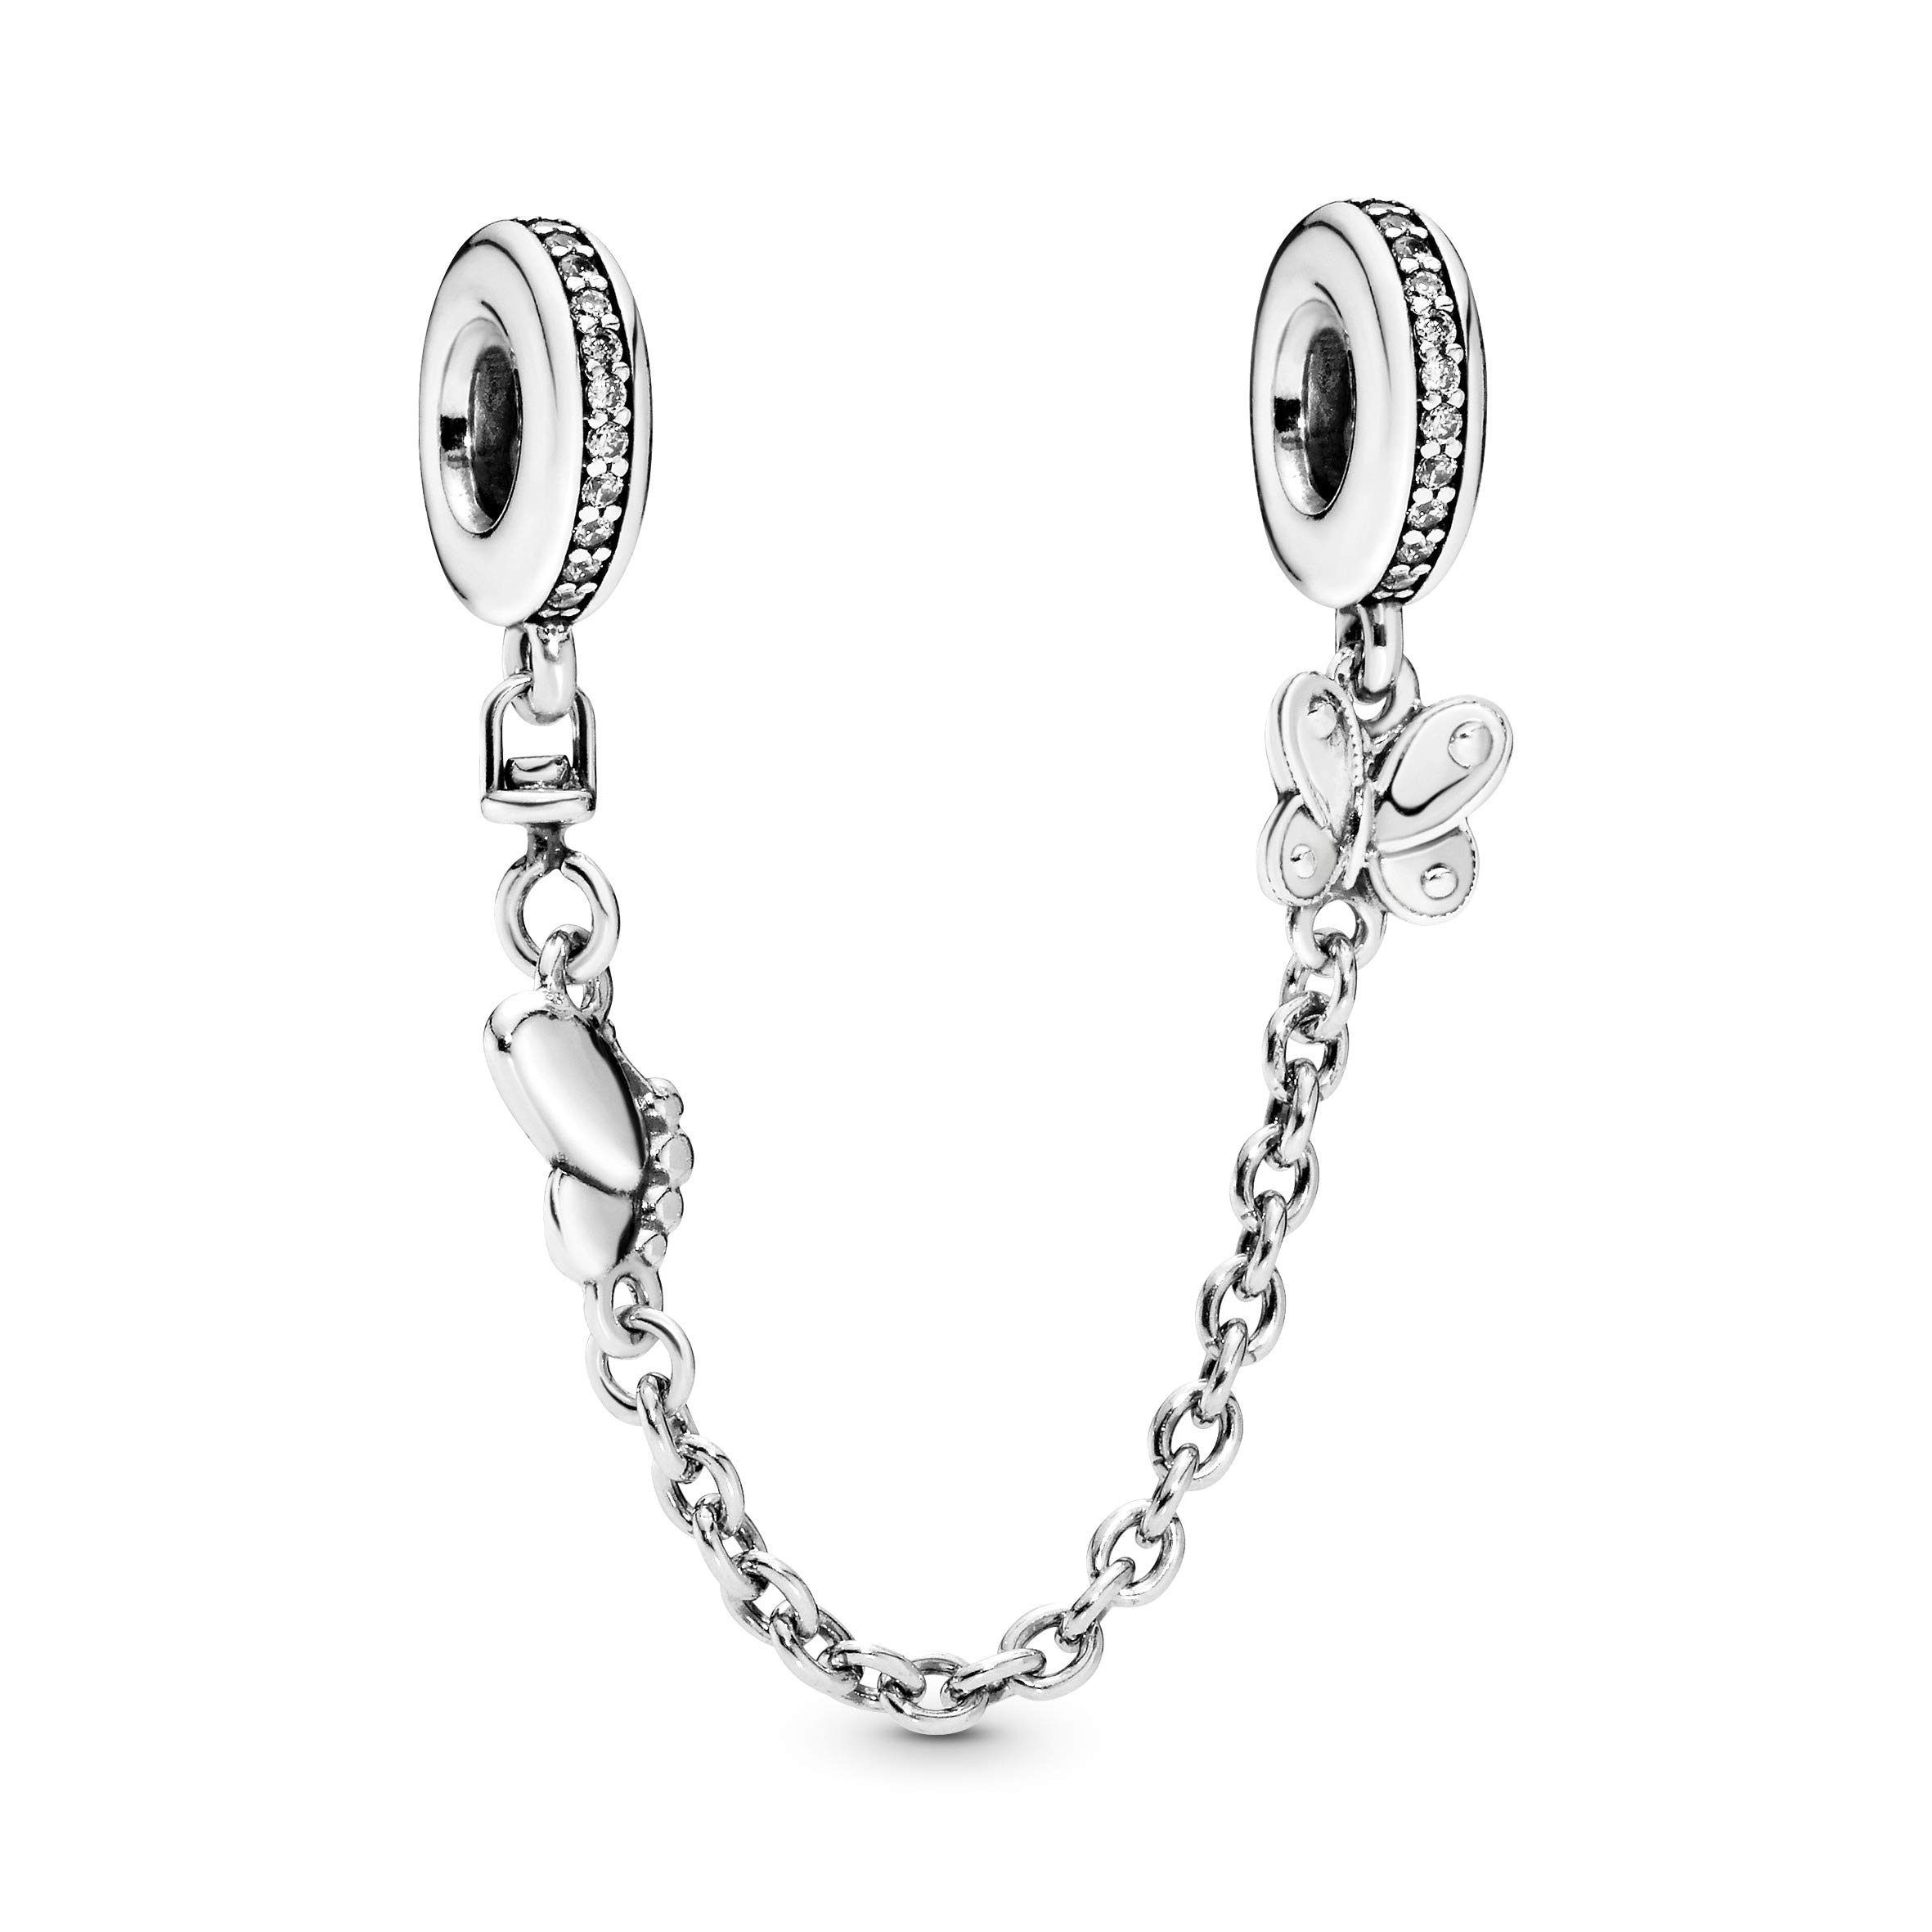 PANDORA Jewelry Butterfly Safety Chain Cubic Zirconia Charm in Sterling Silver, 2.0"